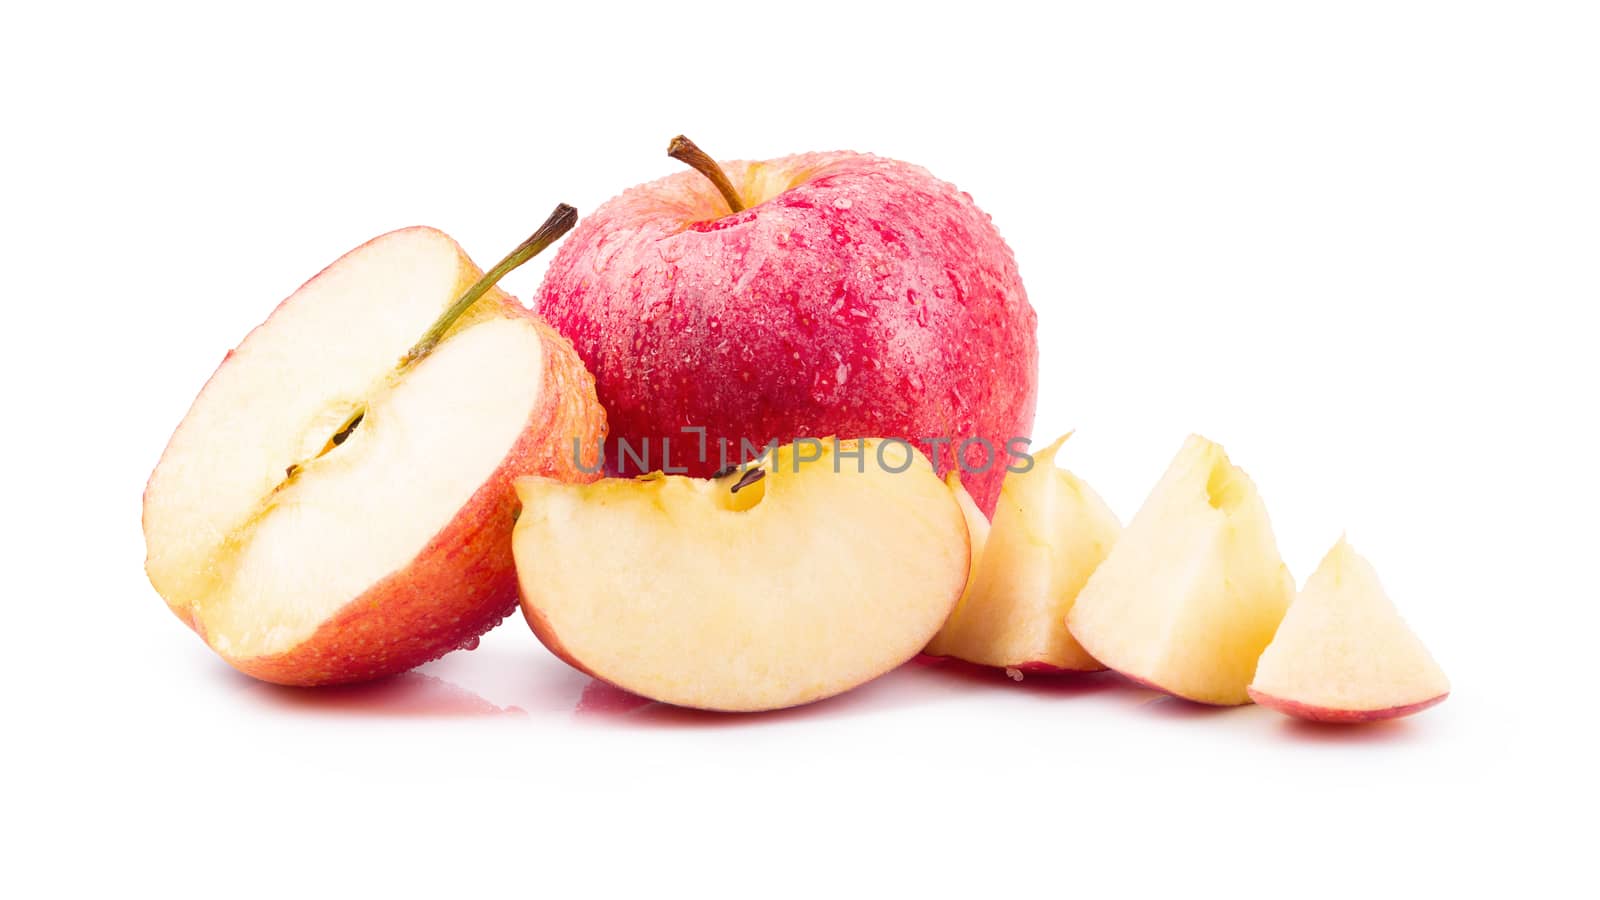 Red apples isolated on a white background.